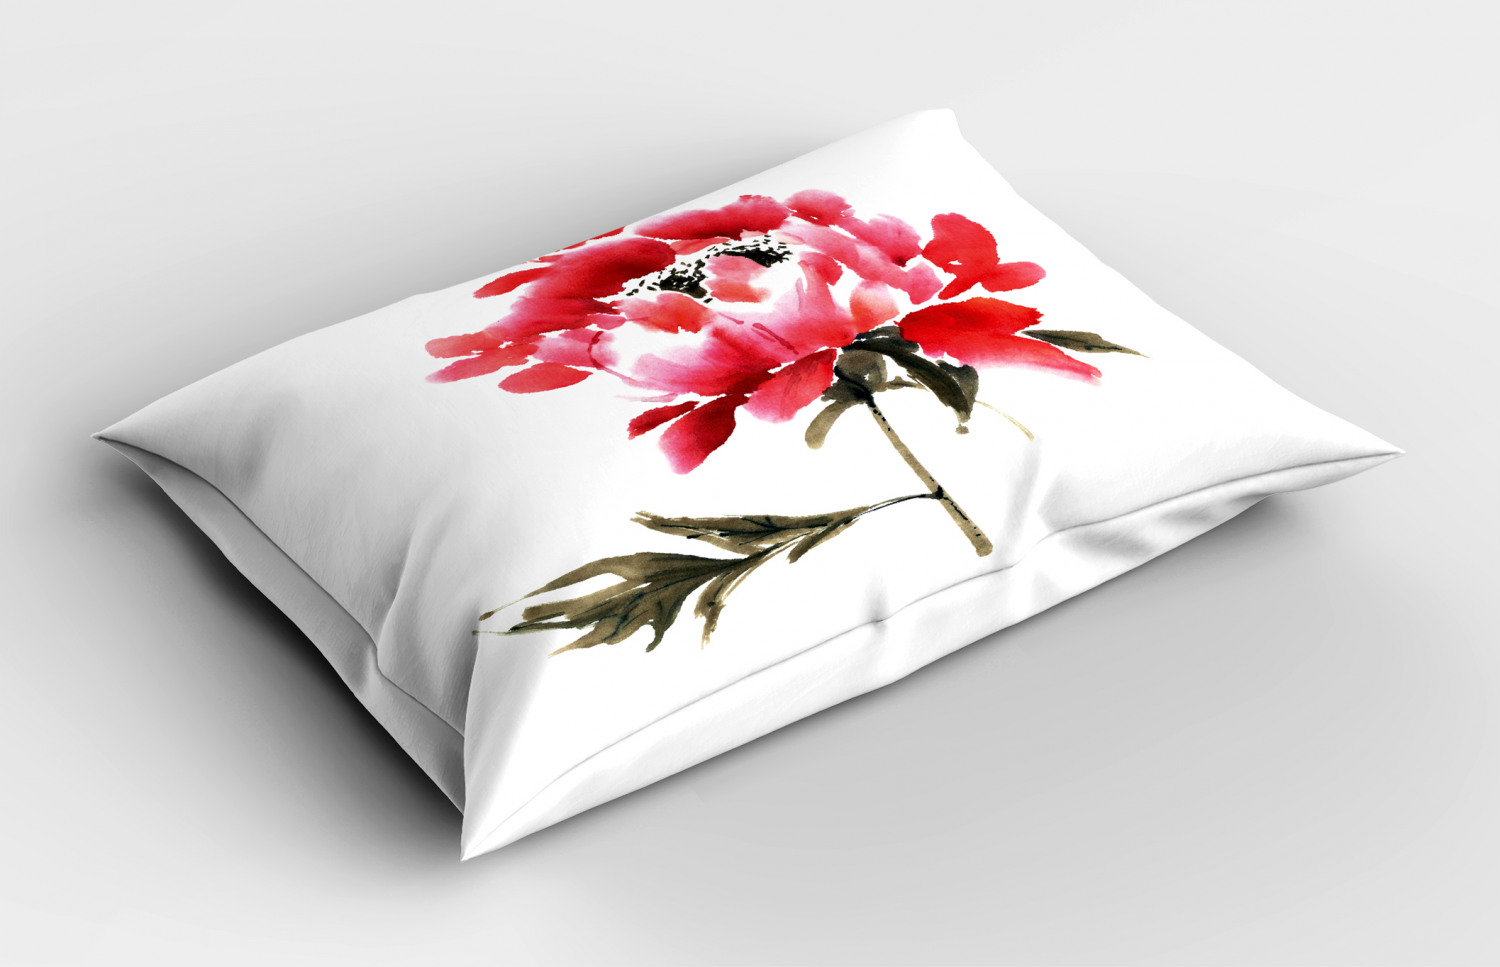 Details about   Pillow Sham Bedroom Decor Printed Pillowcase in 3 Sizes by Ambesonne